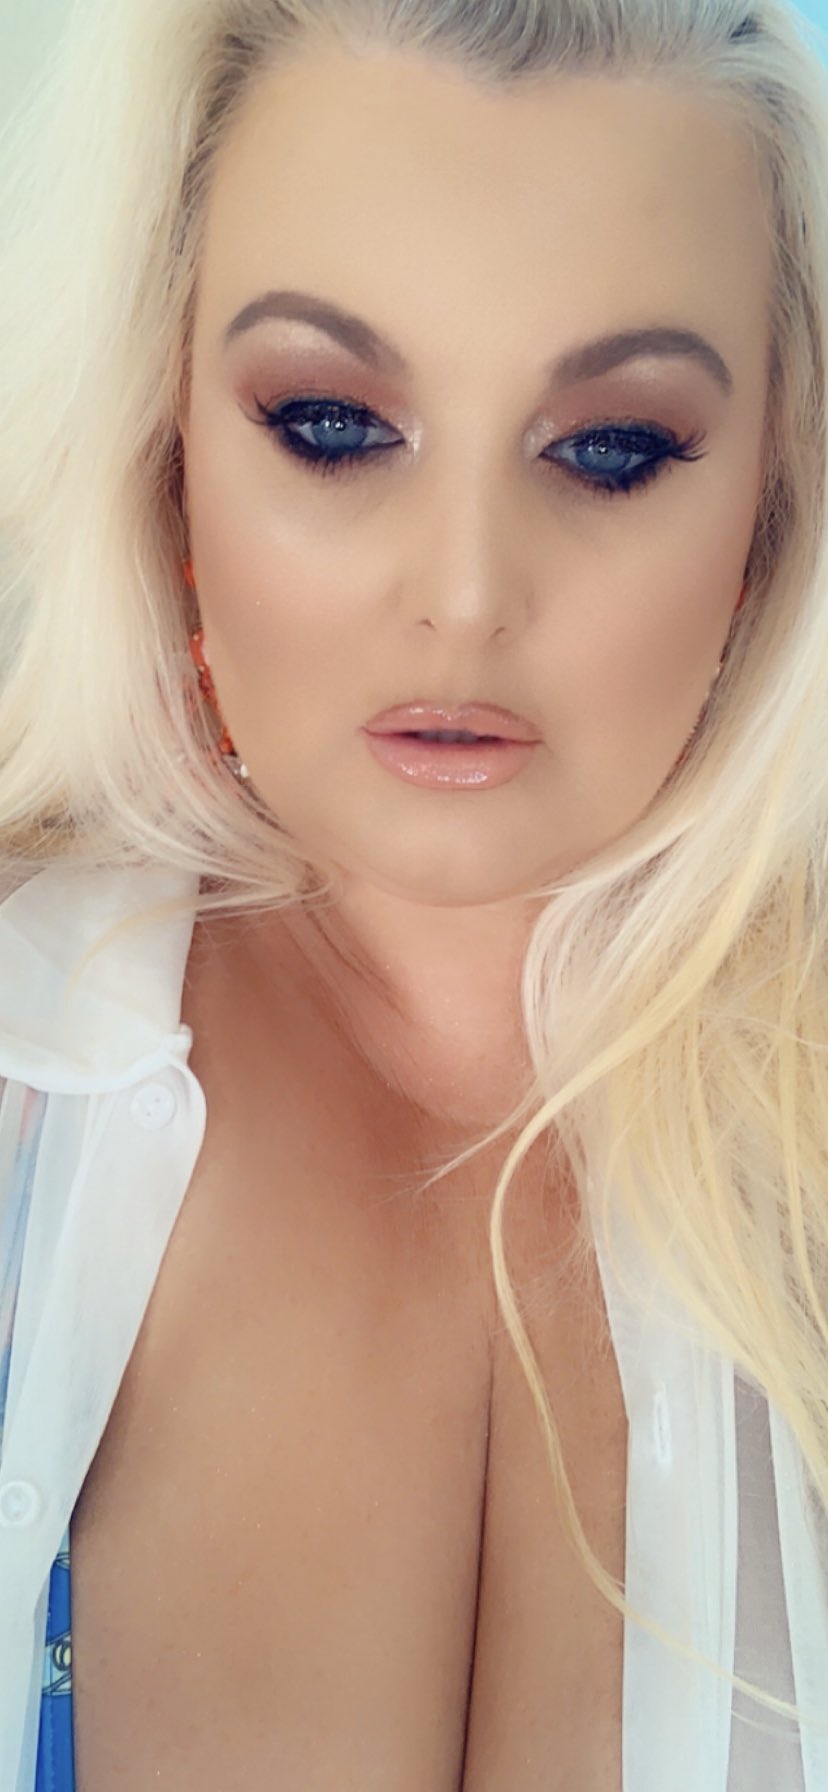 1 pic. So join my onlyfans/kirstynhalborgxxx and check out our fun week of plans Slut Saturday 😈Slumber